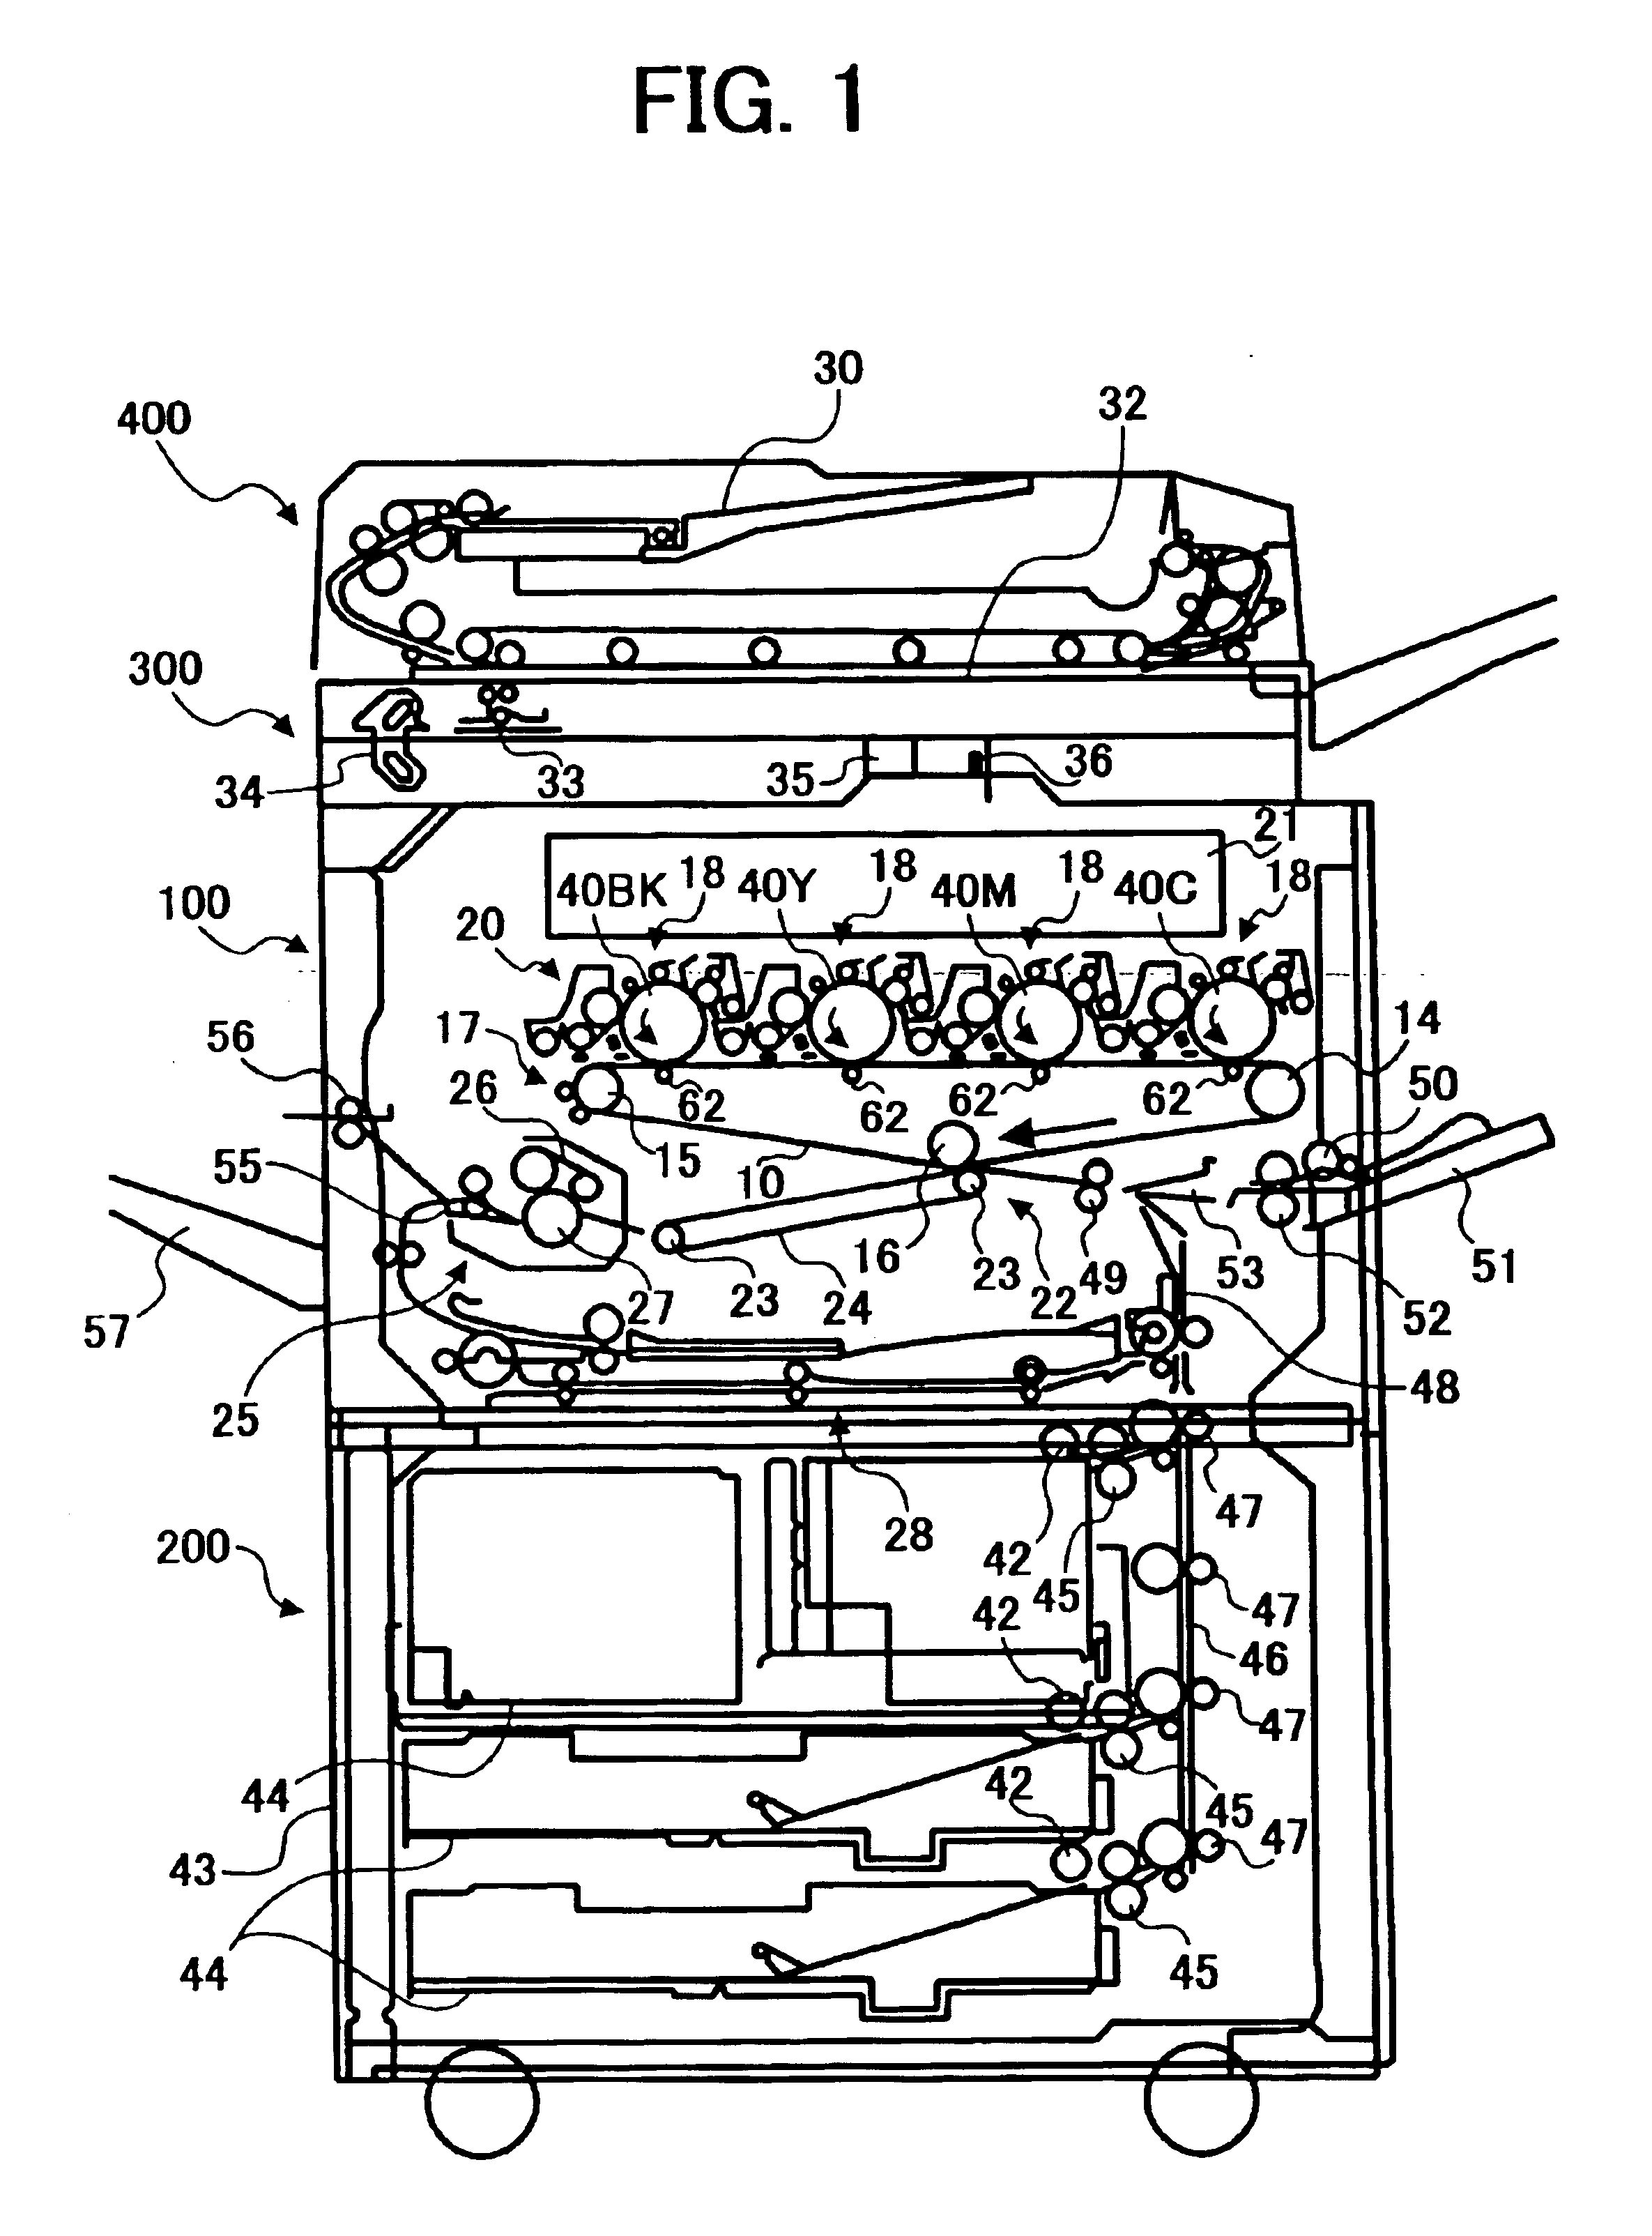 Toner, developer, and image forming method and apparatus